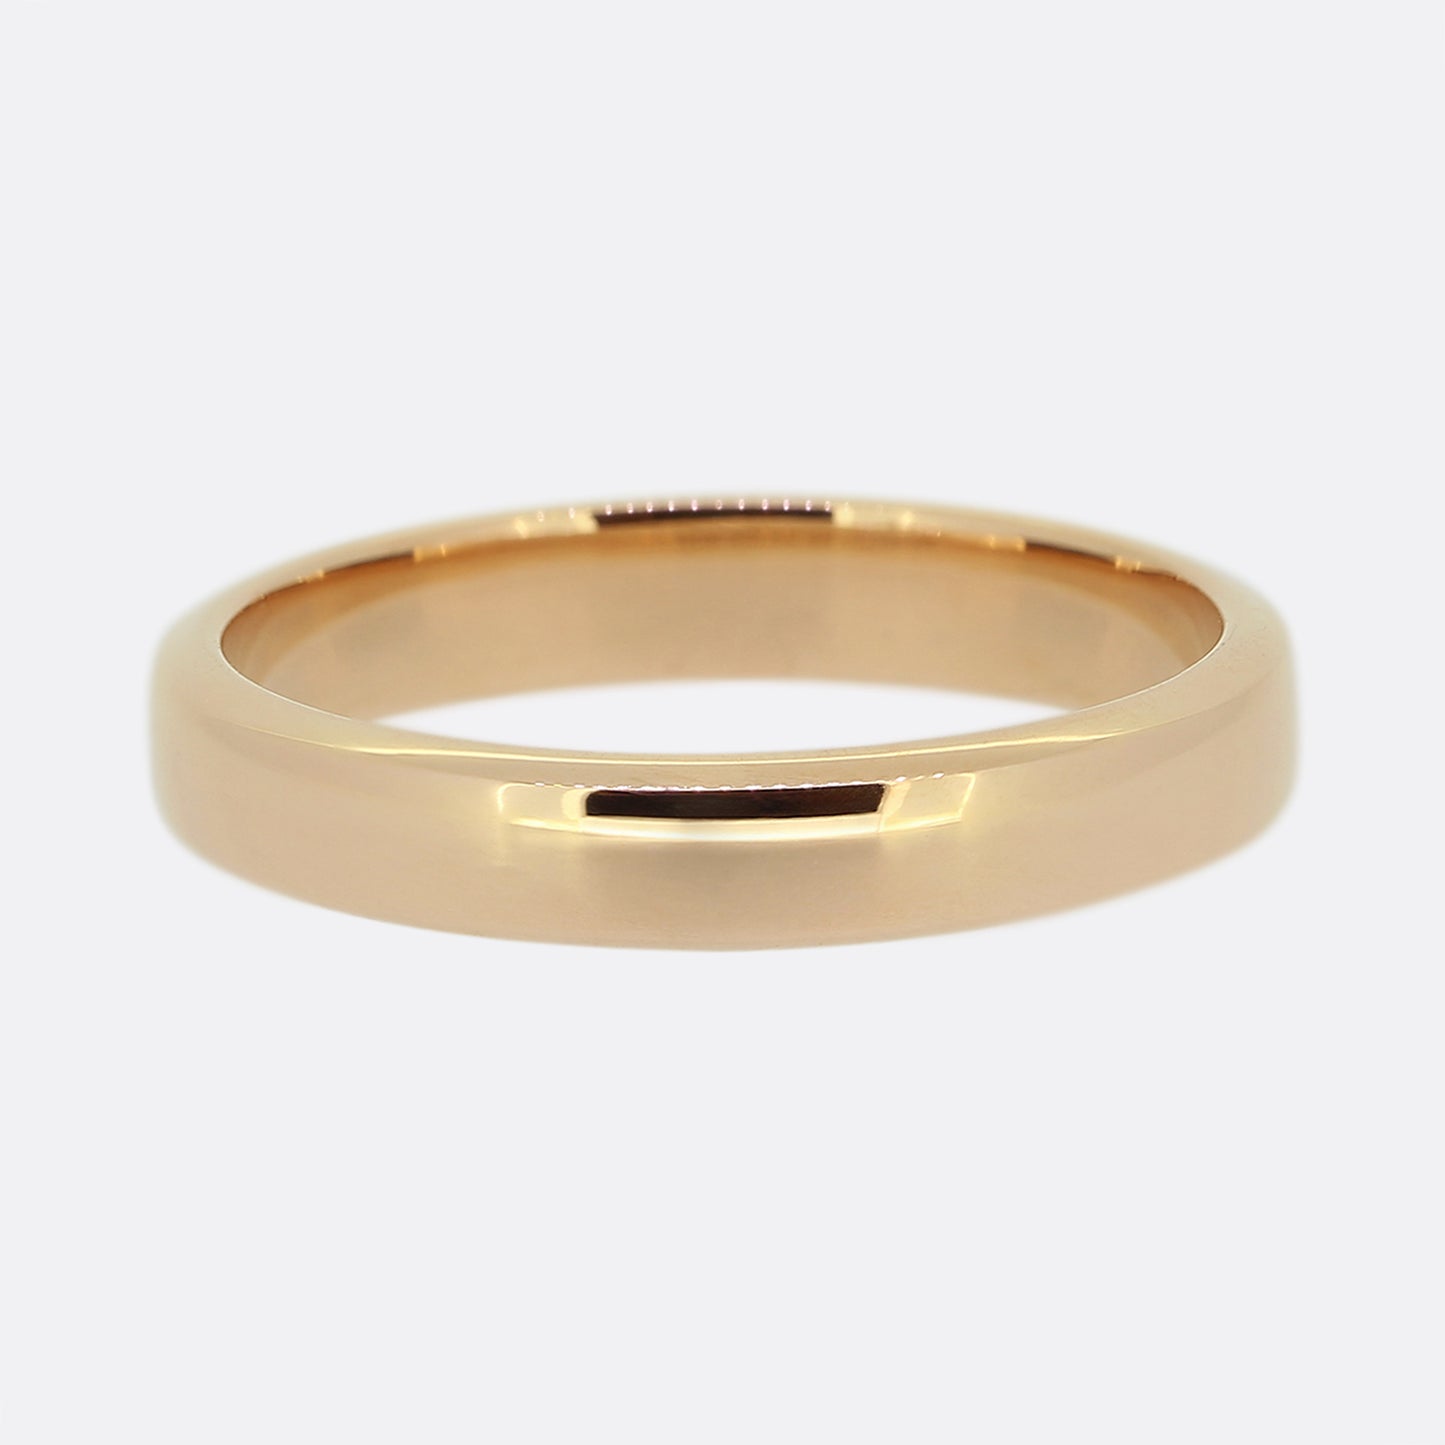 Van Cleef & Arpels 4mm Toujours Wedding Band Ring